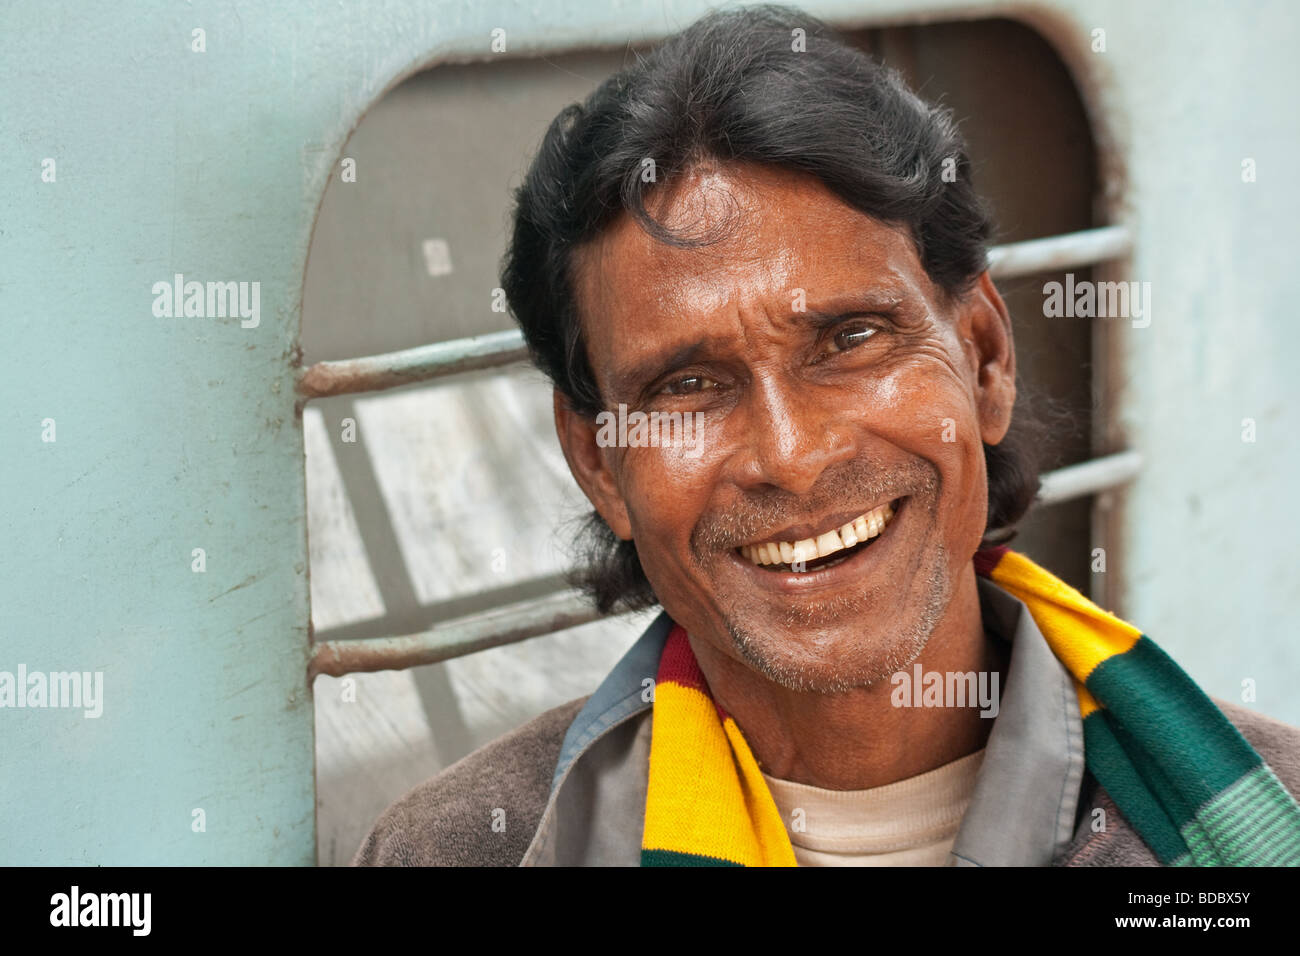 Indian Railways worker looking quite chuffed with himself at Puri station, Orissa, india Stock Photo